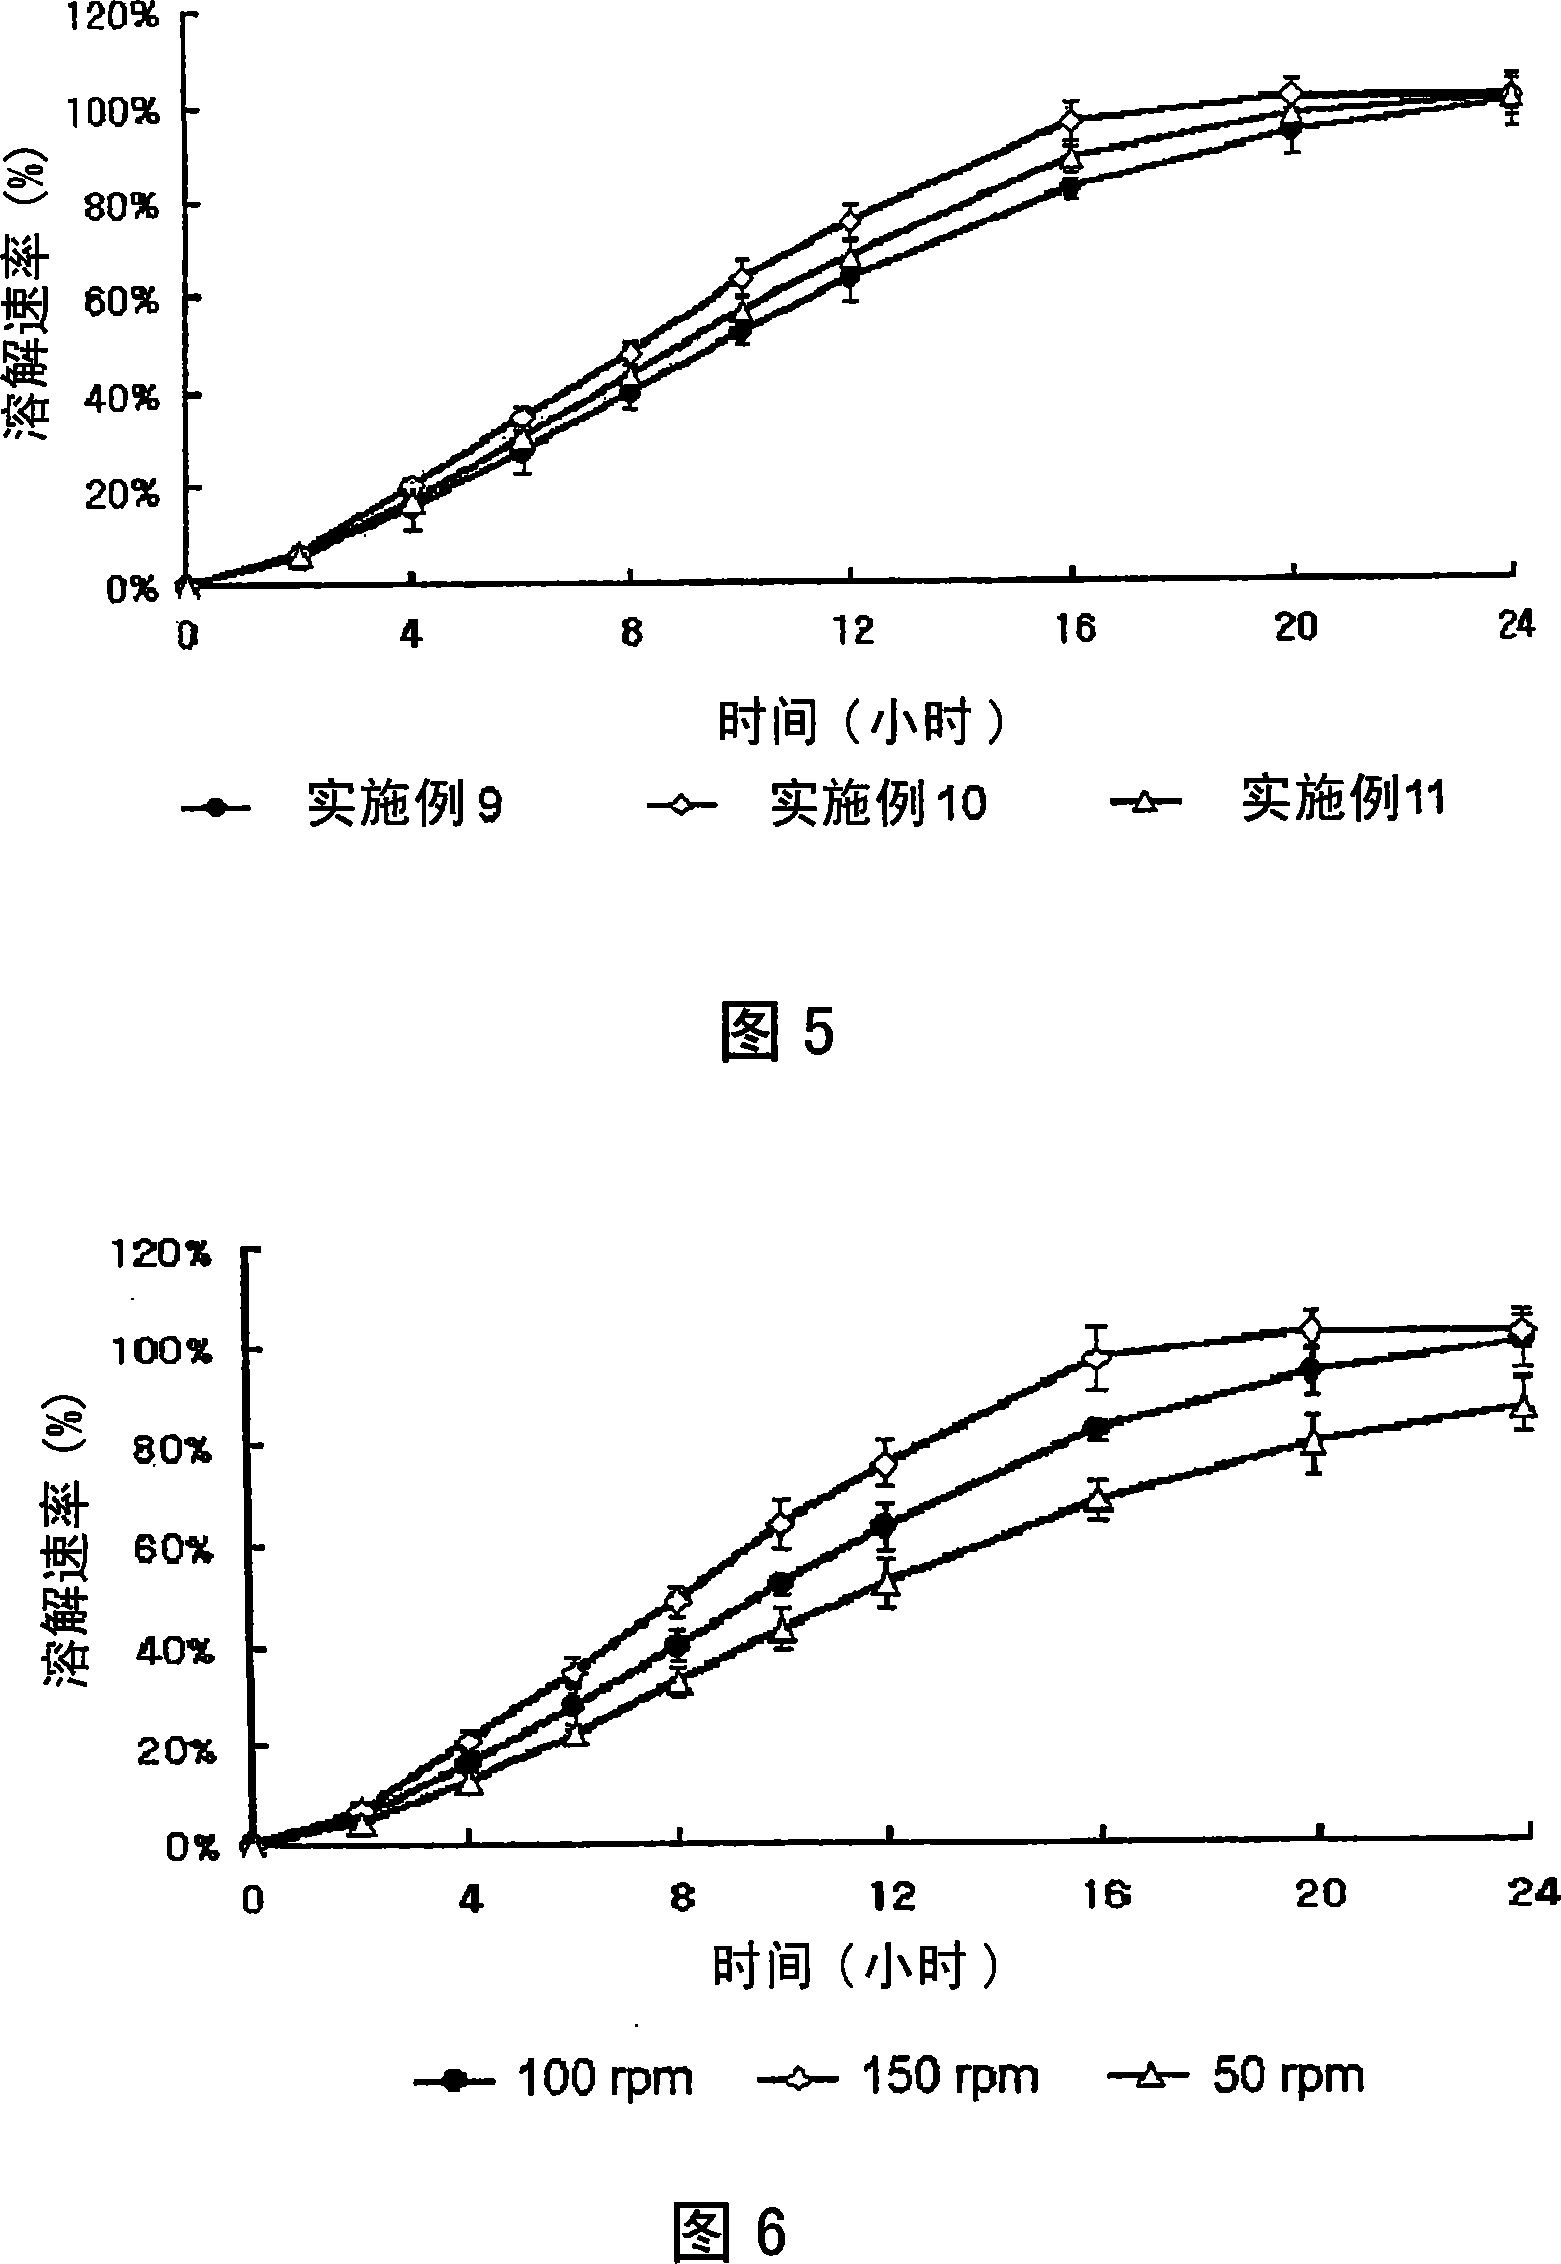 Complex formulation of 3-hydroxy-3-methyl glutaryl coa reductase inhibitor and antihypertensive agent, and process for preparing same